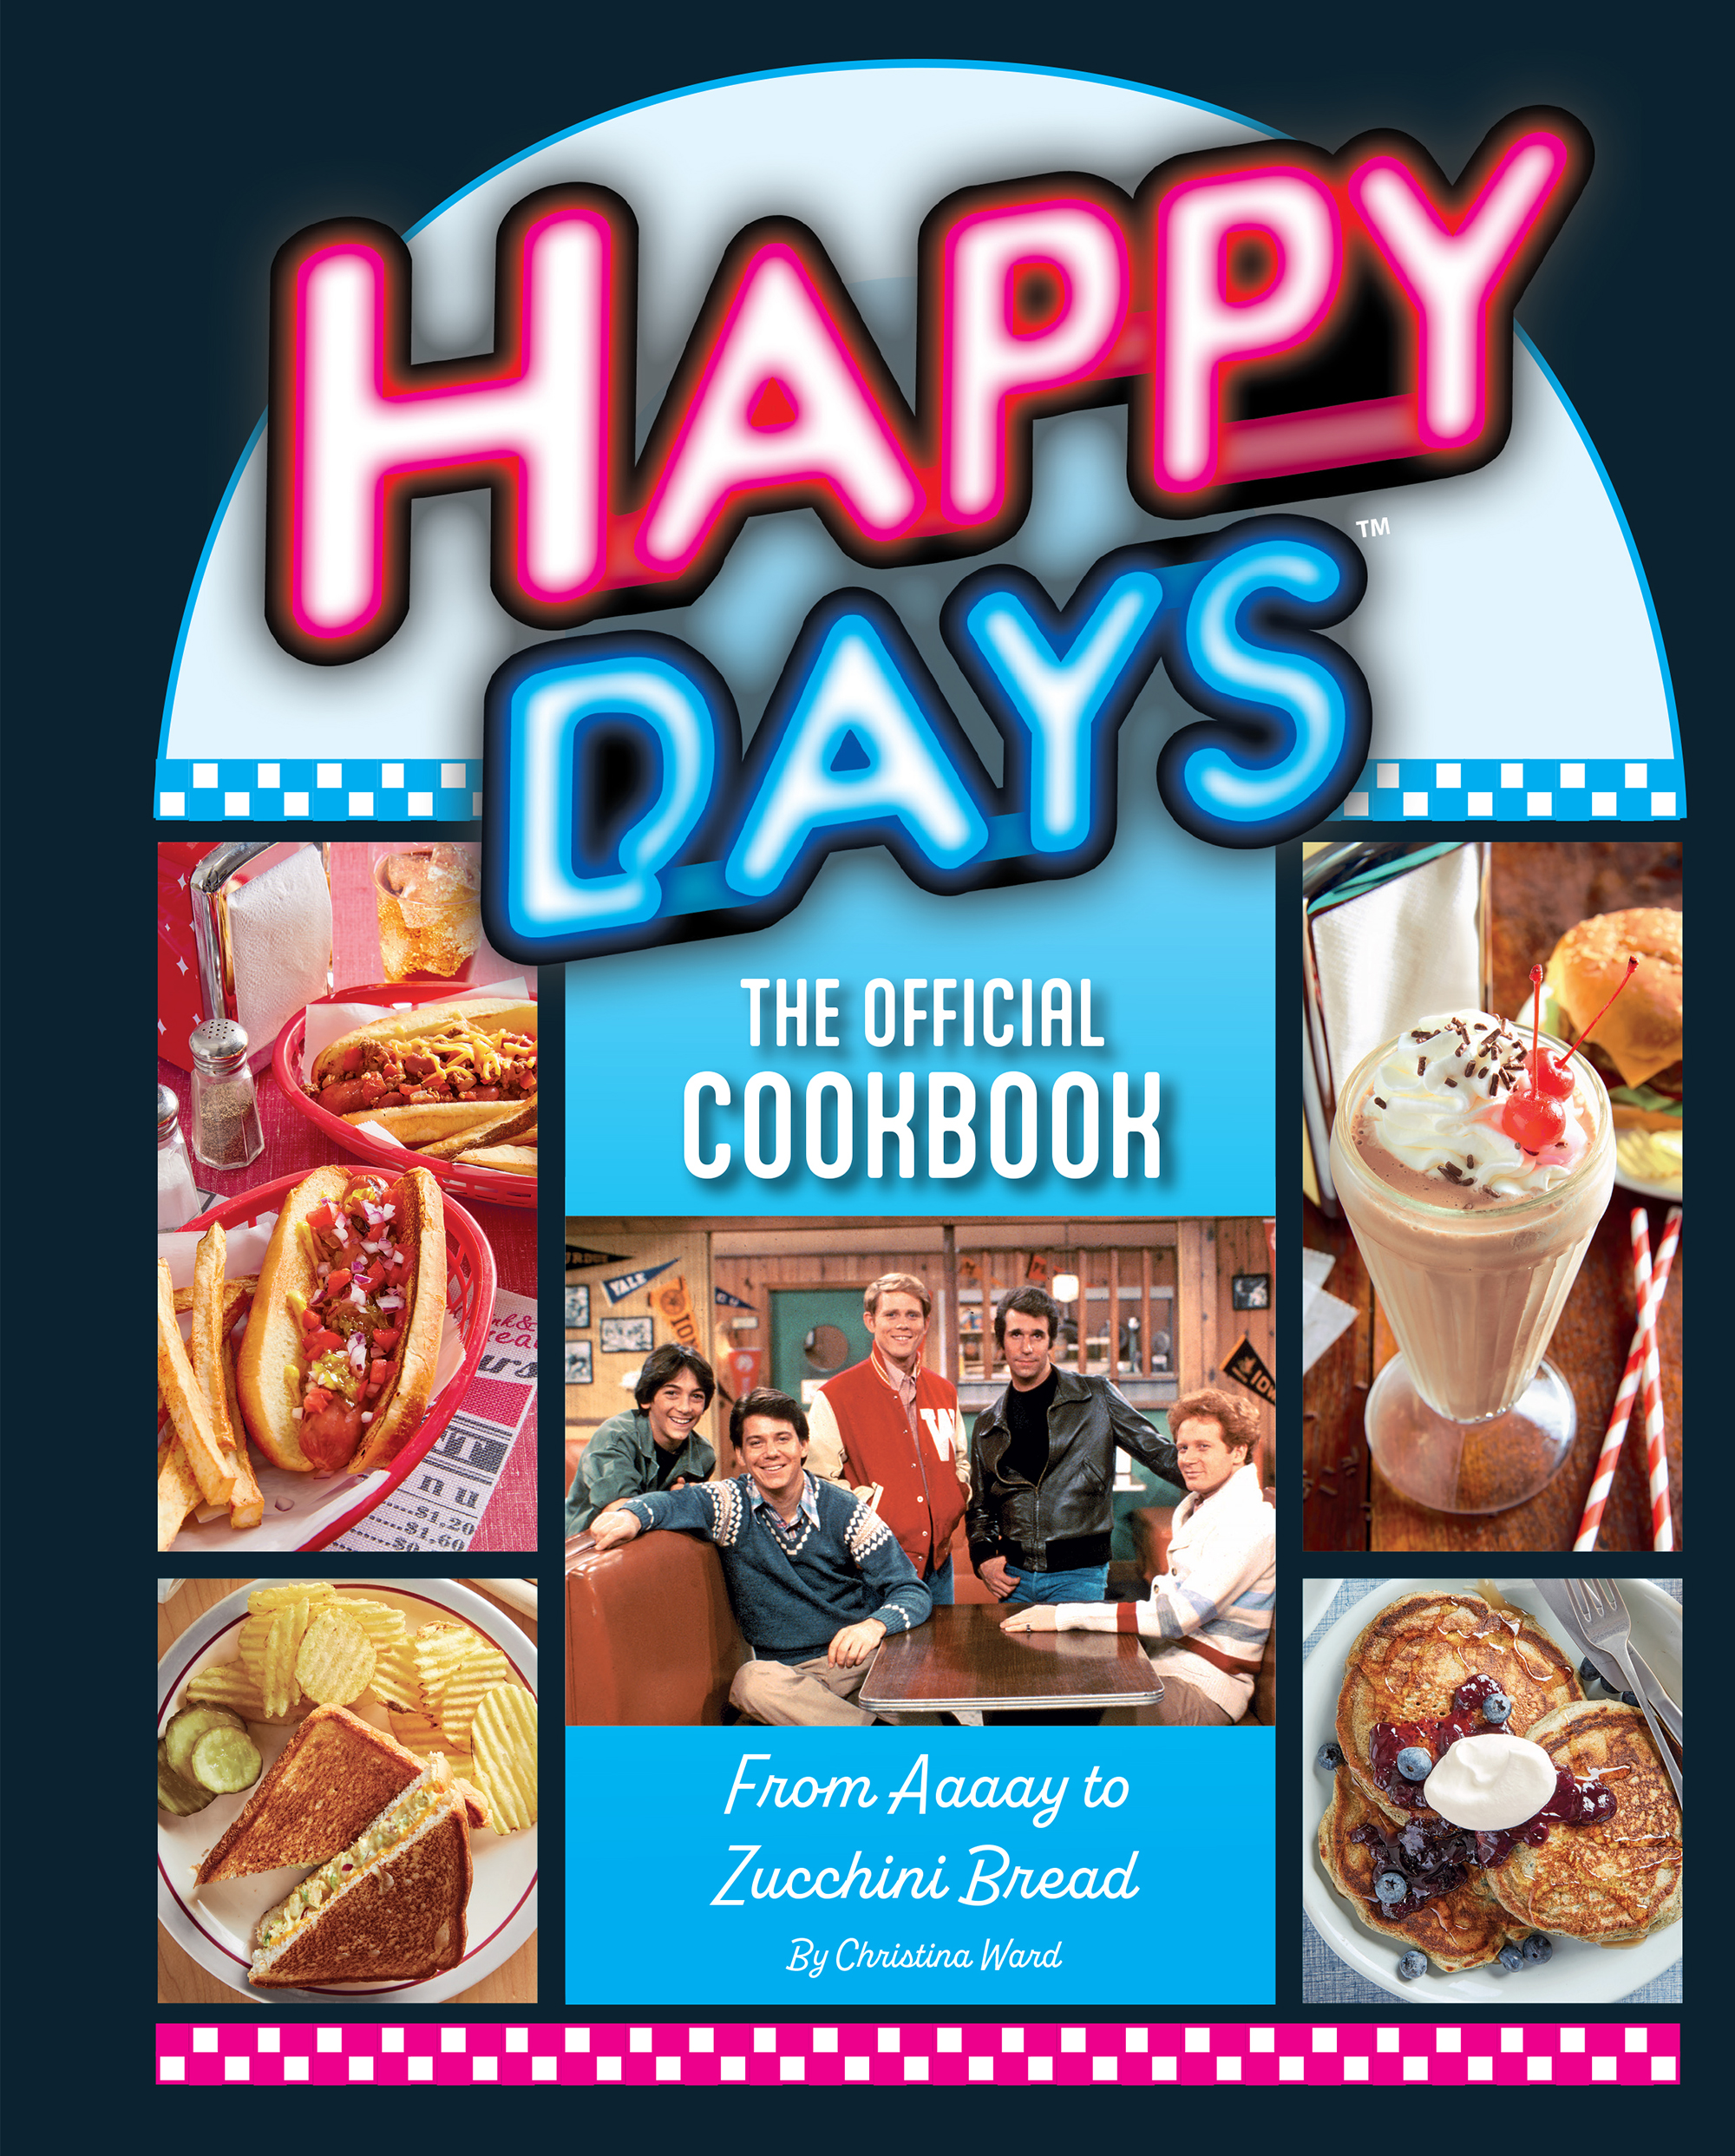 front cover of "Happy Days: The Official Cookbook." The top of the cover features the "Happy Days" title stylized as it was on the TV show, looking like a '50s jukebox. right below in smaller white print is "The Official Cookbook." Below that is a square photo with "Happy Days" characters taken during the 1970, seated in the fictional Arnold's restaurant. Left to right are Chachi (Scott Baio), Potsie (Anson Williams), Richie (Ron Howard), the Fonz (Henry Winkler) and Ralph (Don Most). Around this photo are photos, two vertical ones on either side, of some of the foods that can be made with the book's recipes, including pancakes, sundaes and sandwiches. Below the cast photo, in white print, reads the title's deck: "From Aaaay to Zucchini Bread." Below that reads: "By Christina Ward"